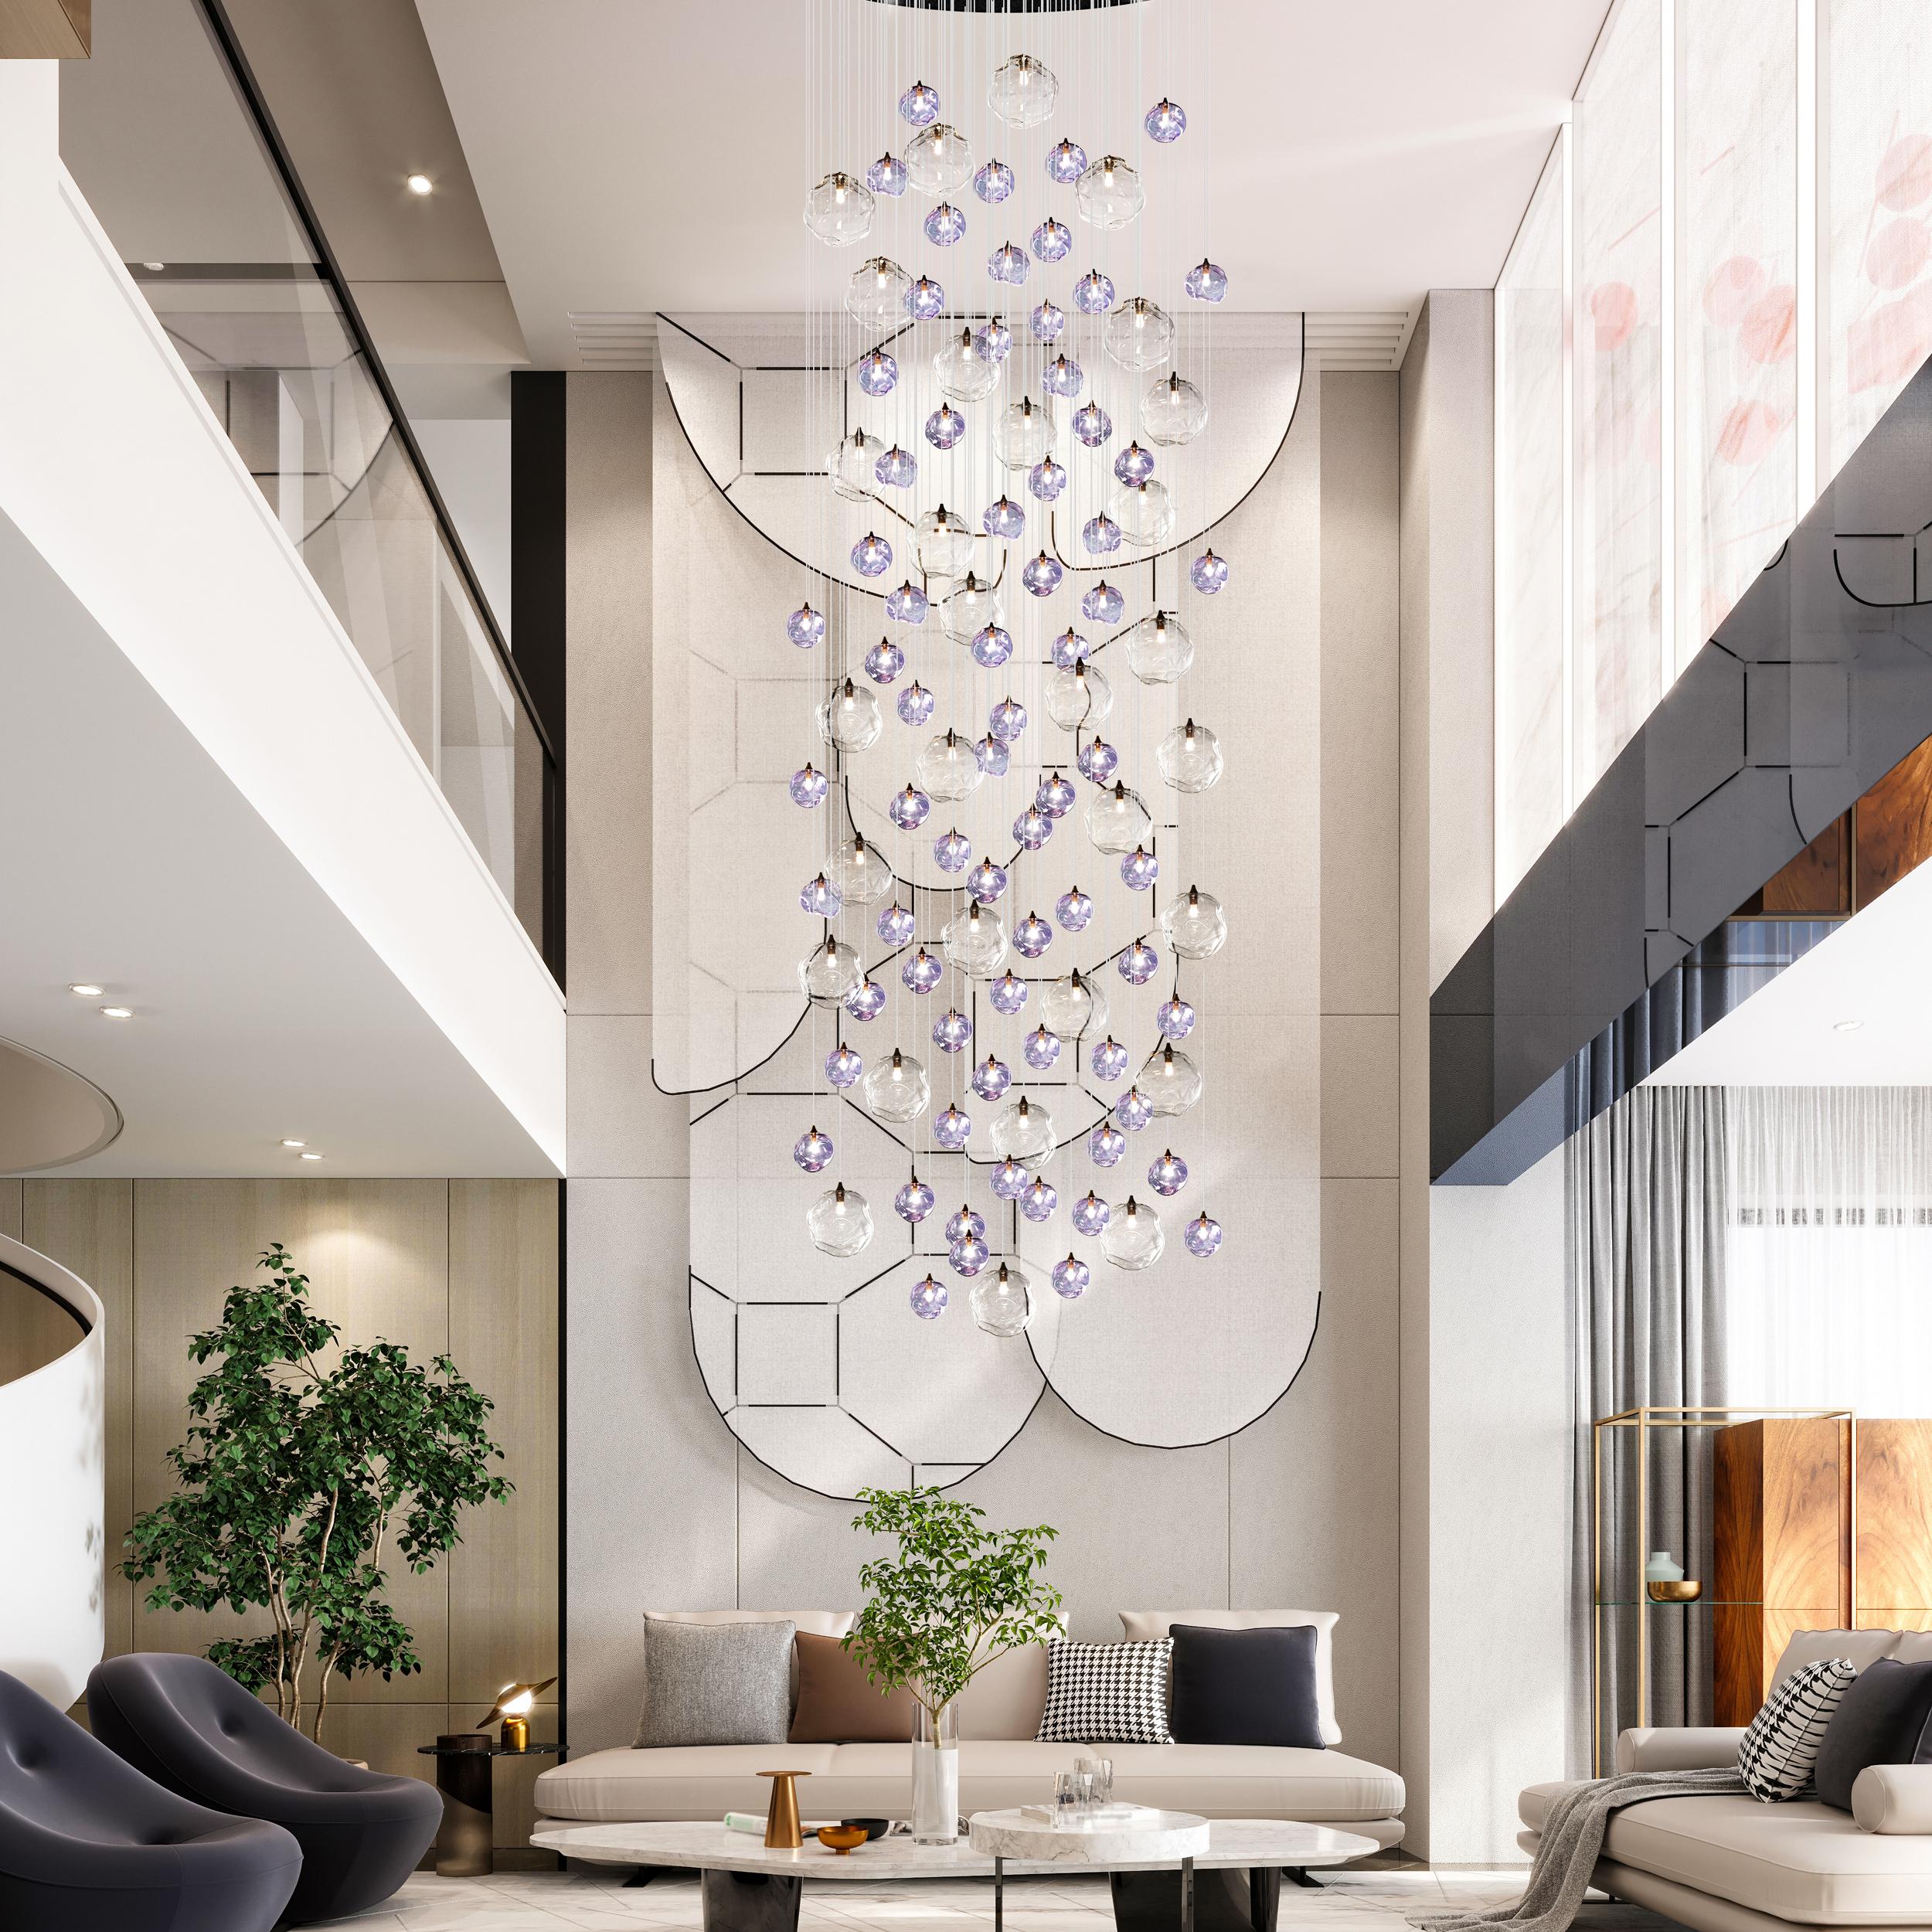 The Palazzo Ametista long chandelier is handcrafted with the outmost artistry and attention to detail. This handcrafted extra-long chandelier is ideal for large spaces with high ceilings, a multi-story foyer or as a stairwell illumination piece.